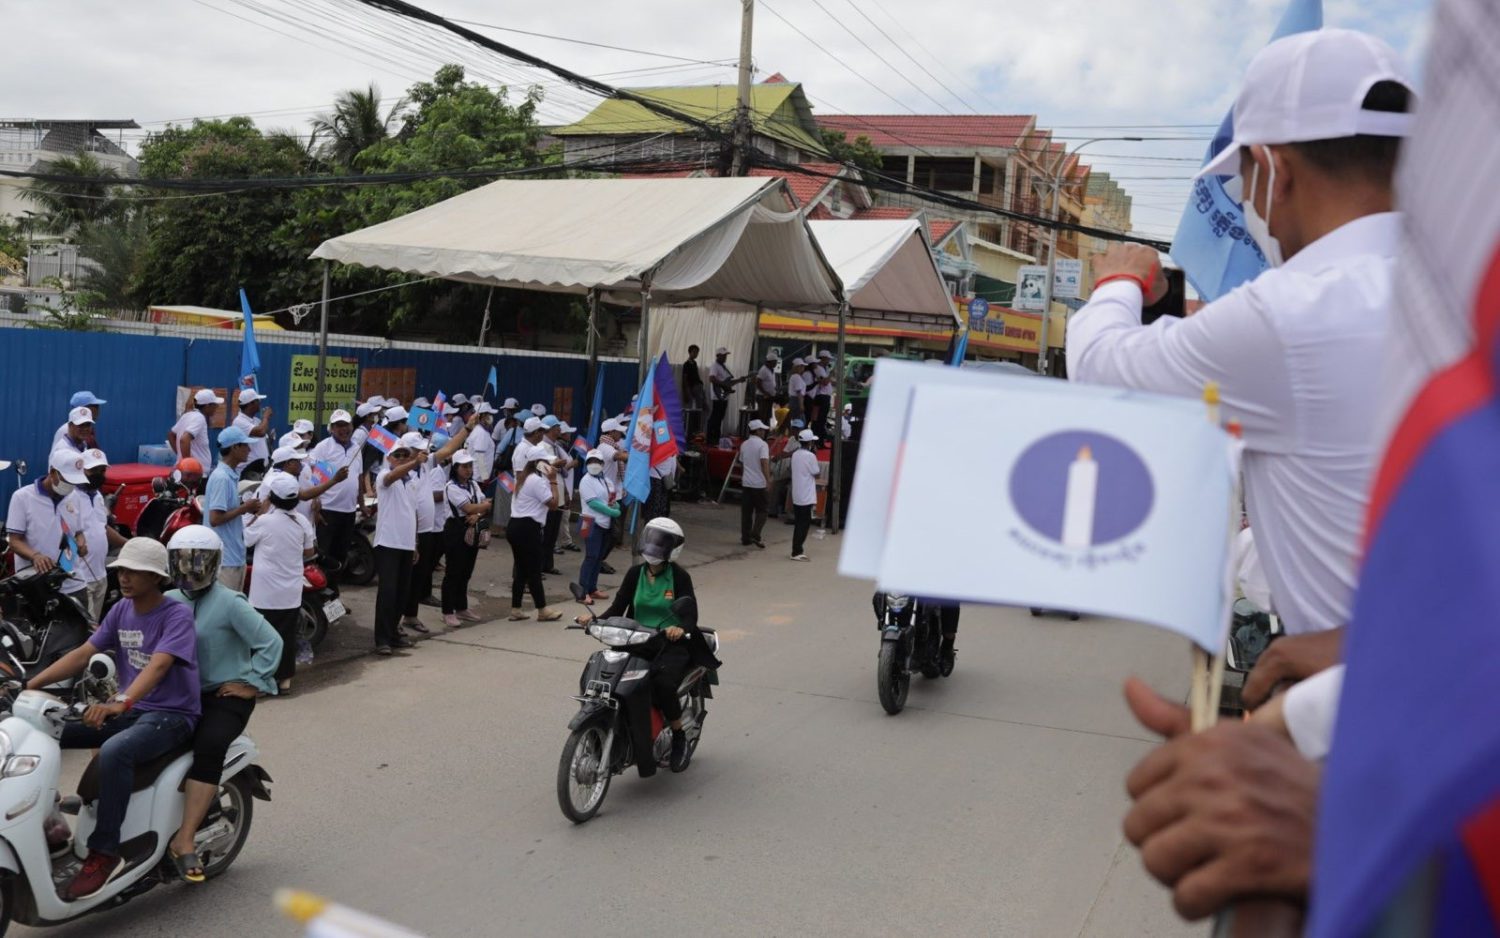 The Candlelight Party’s campaign rally in Phnom Penh on May 21, 2022. (Roun Ry/VOD)